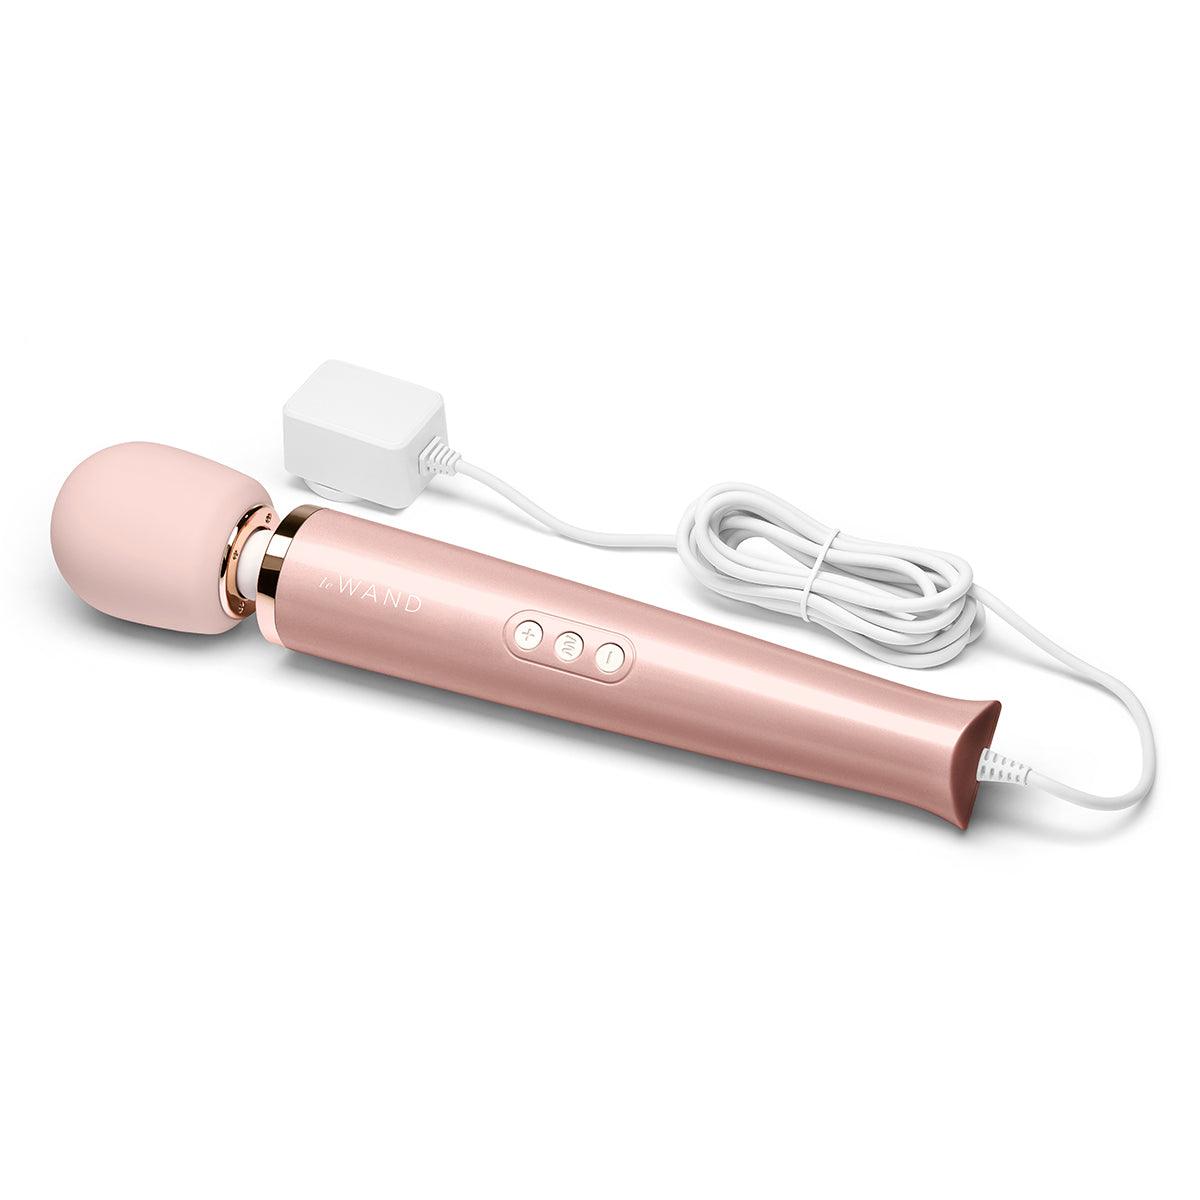 Le Wand Corded Massager - Rose Gold - shop enby